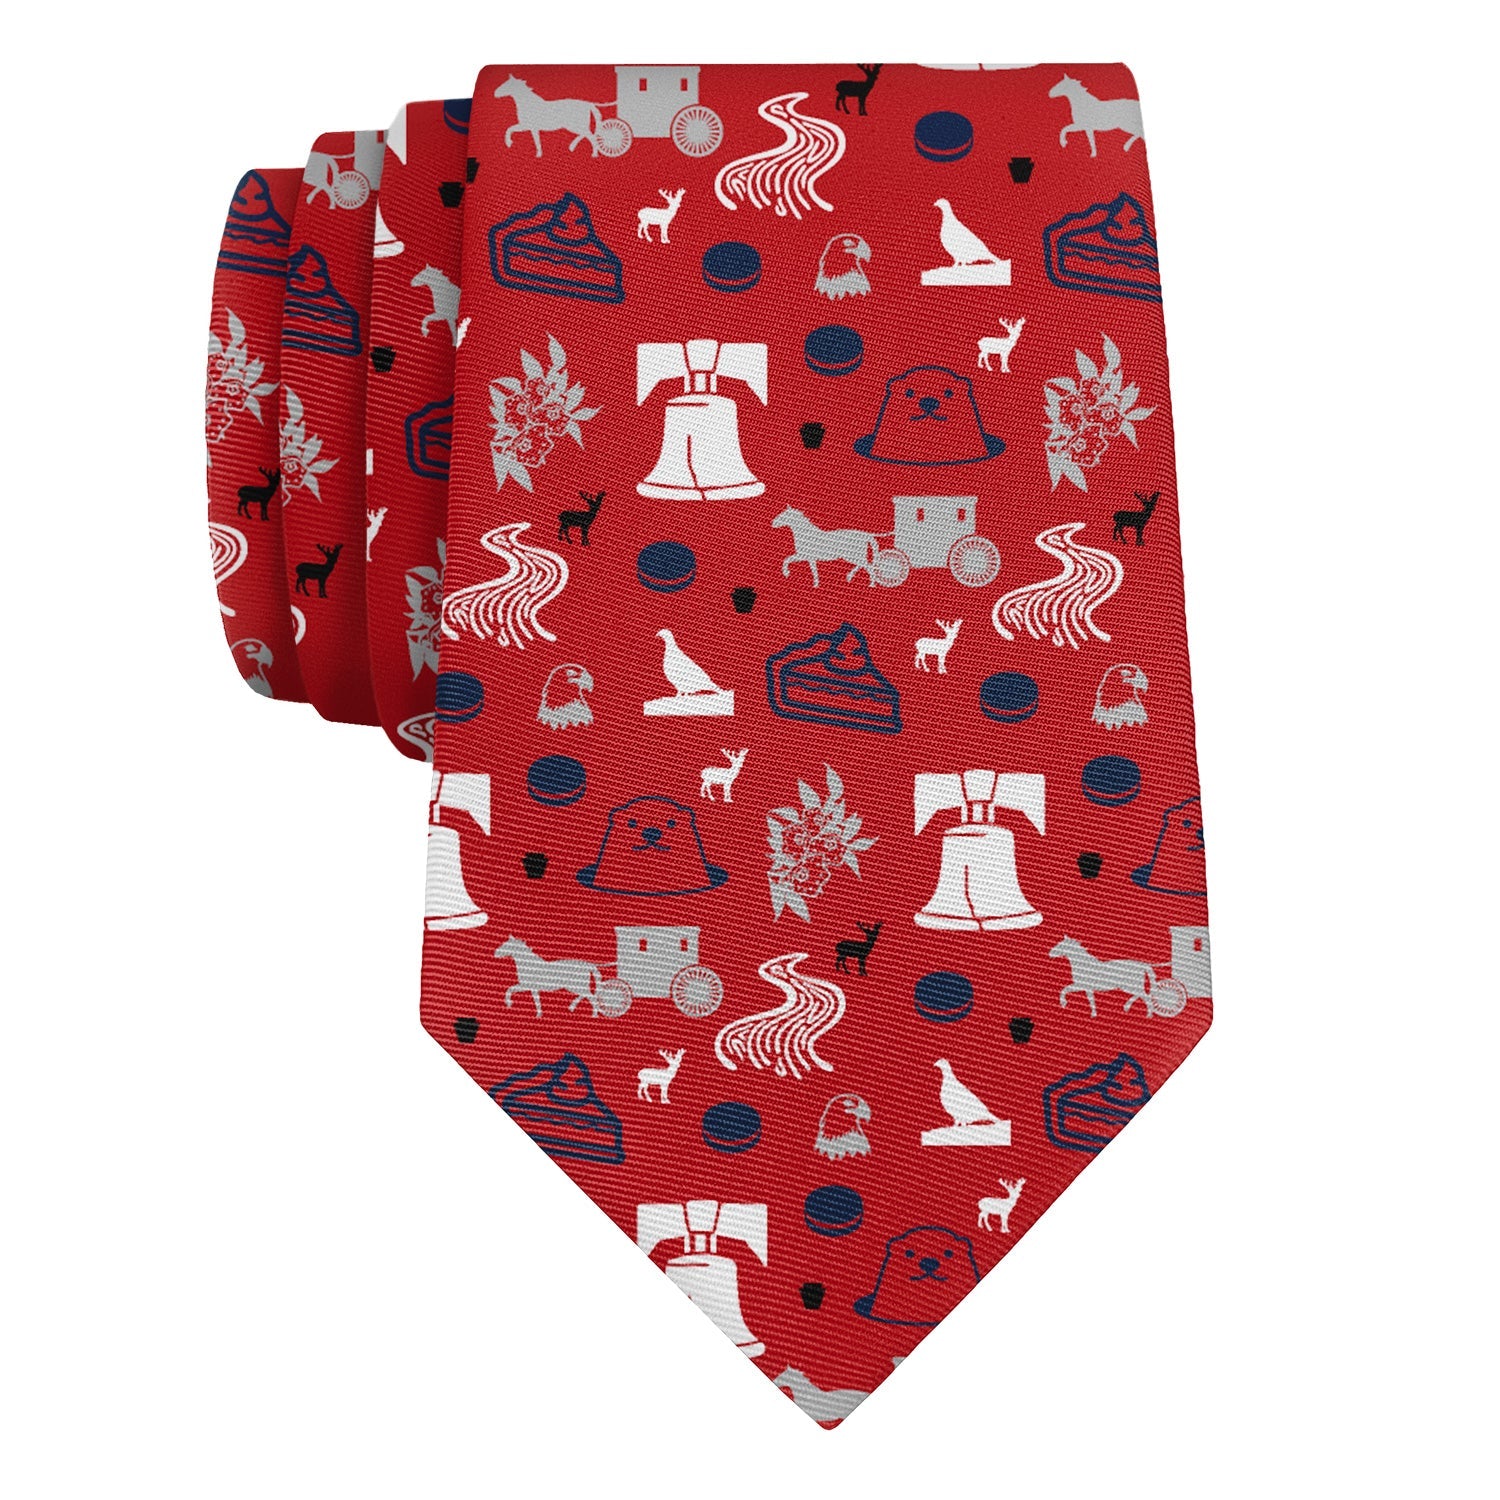 Pennsylvania State Heritage Necktie - Rolled - Knotty Tie Co.